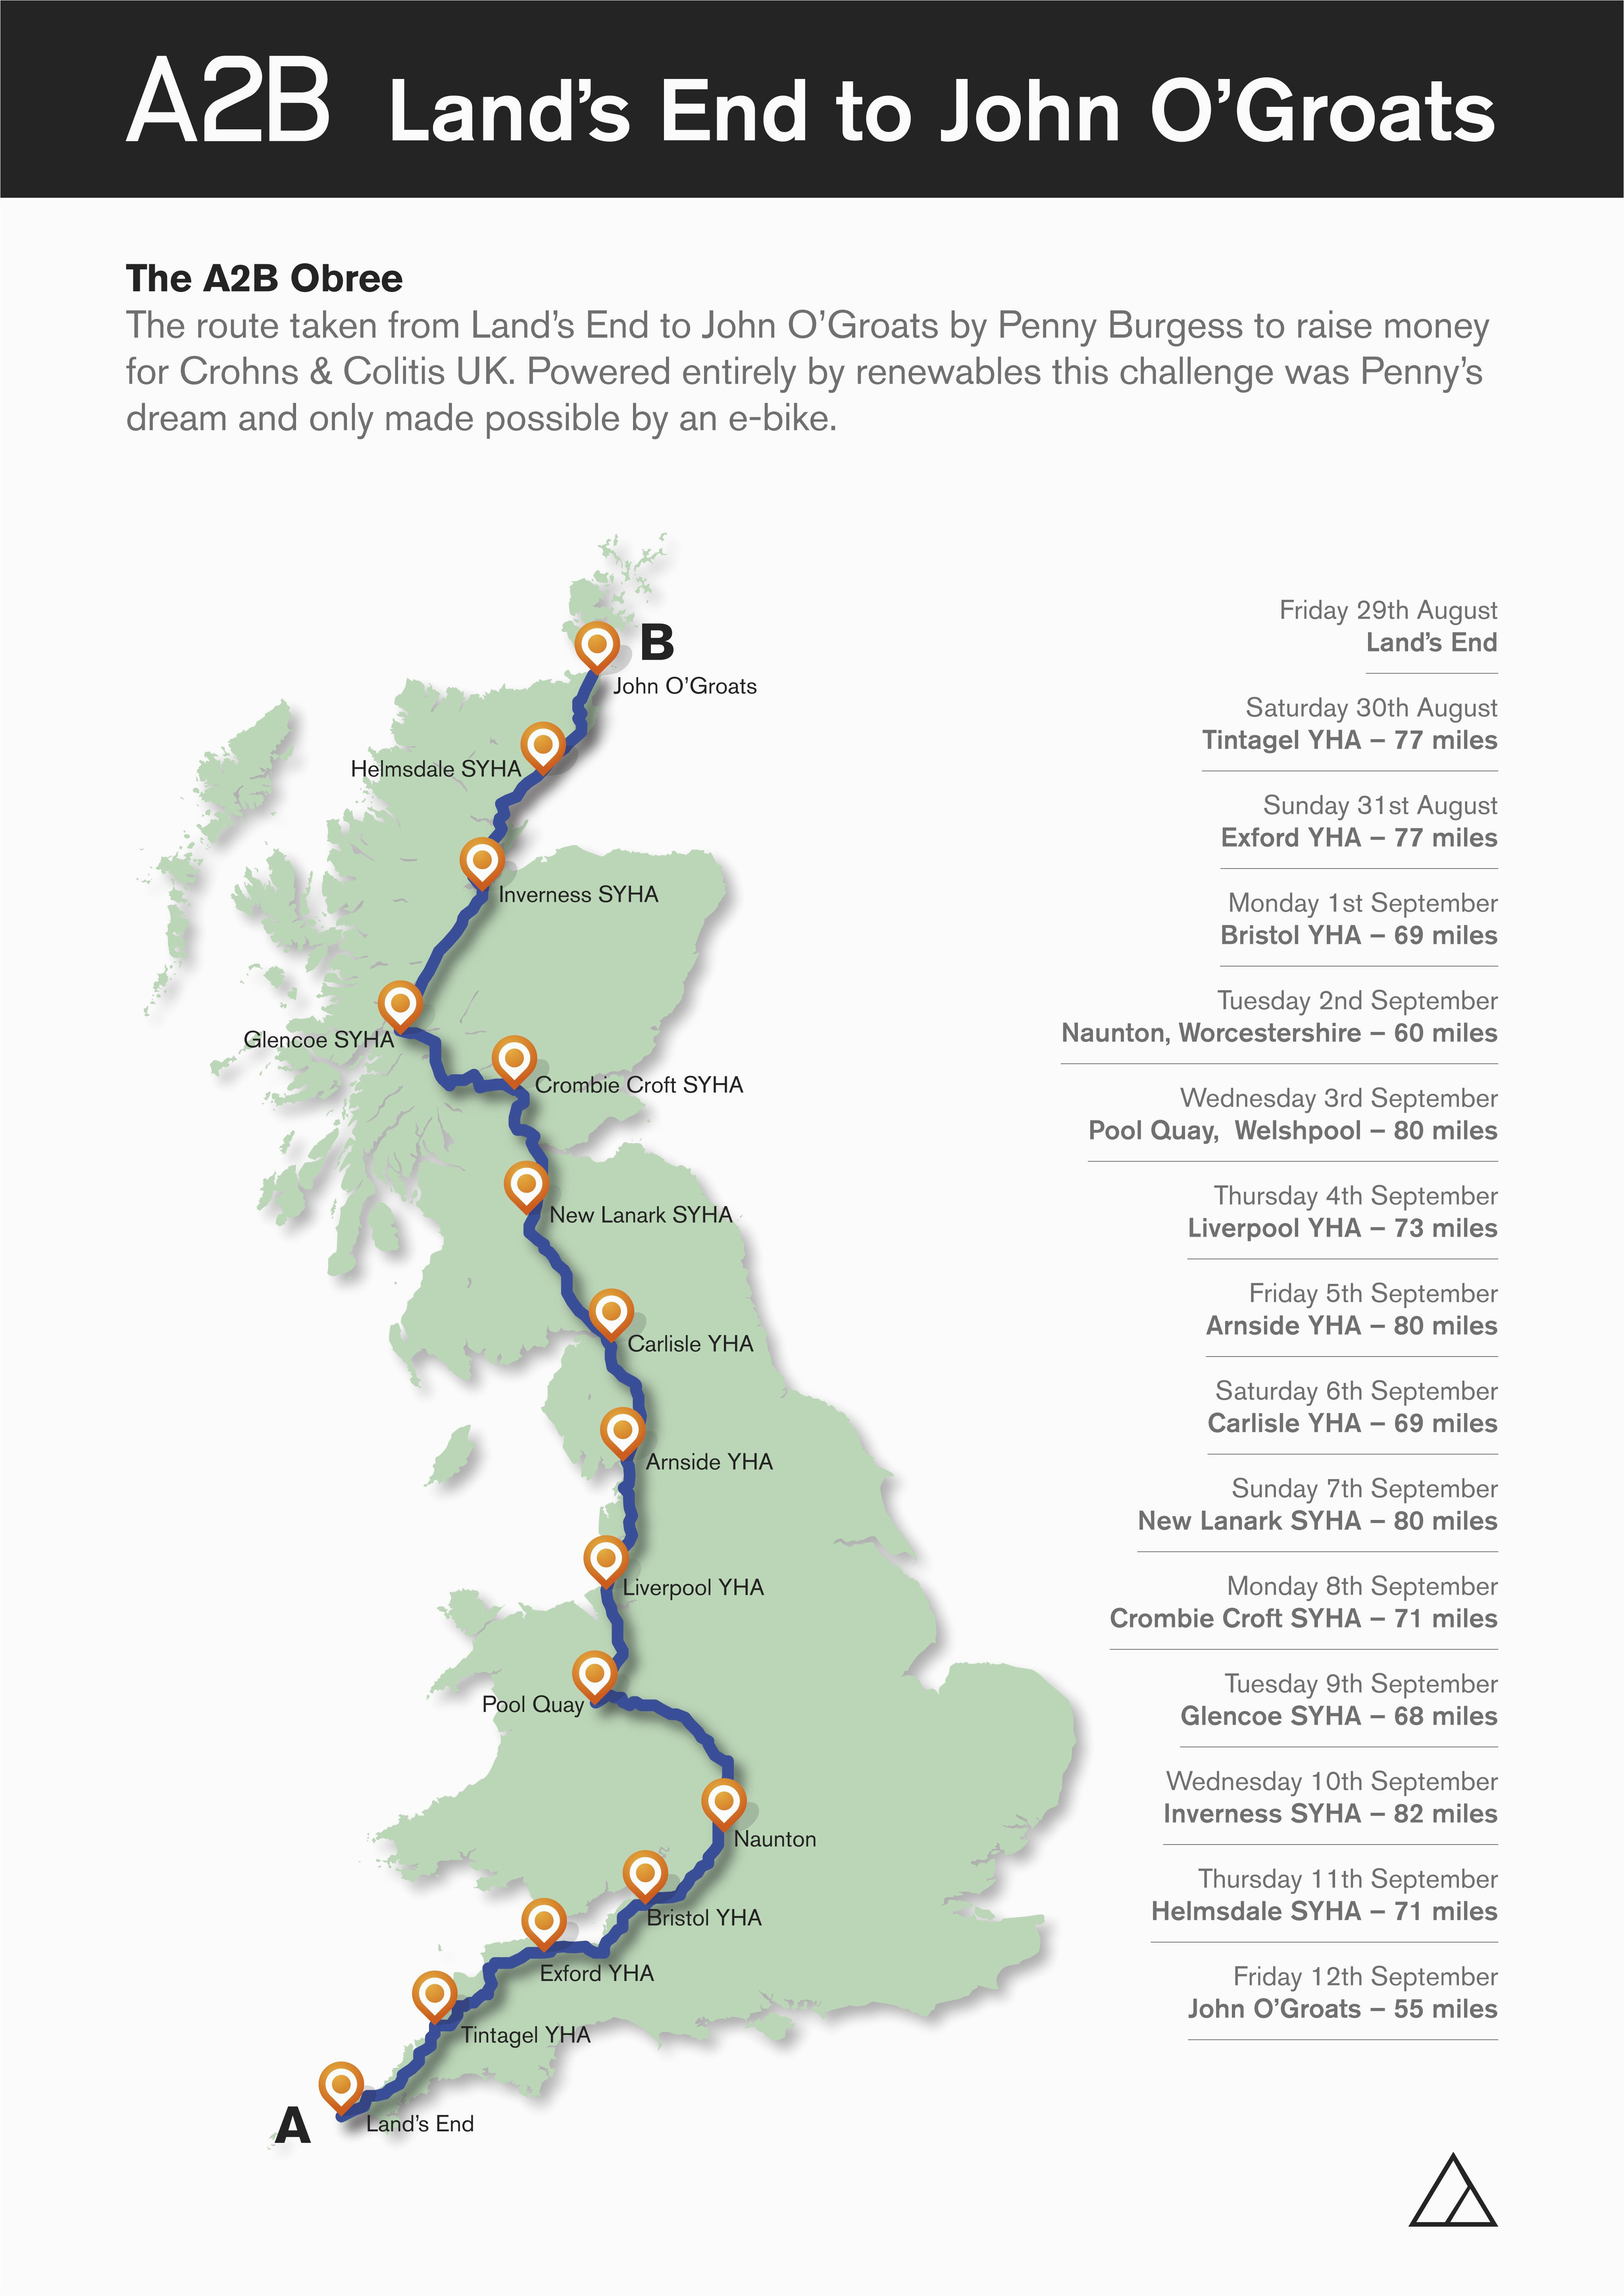 the journey from lands end to john o groats on an a2b obree